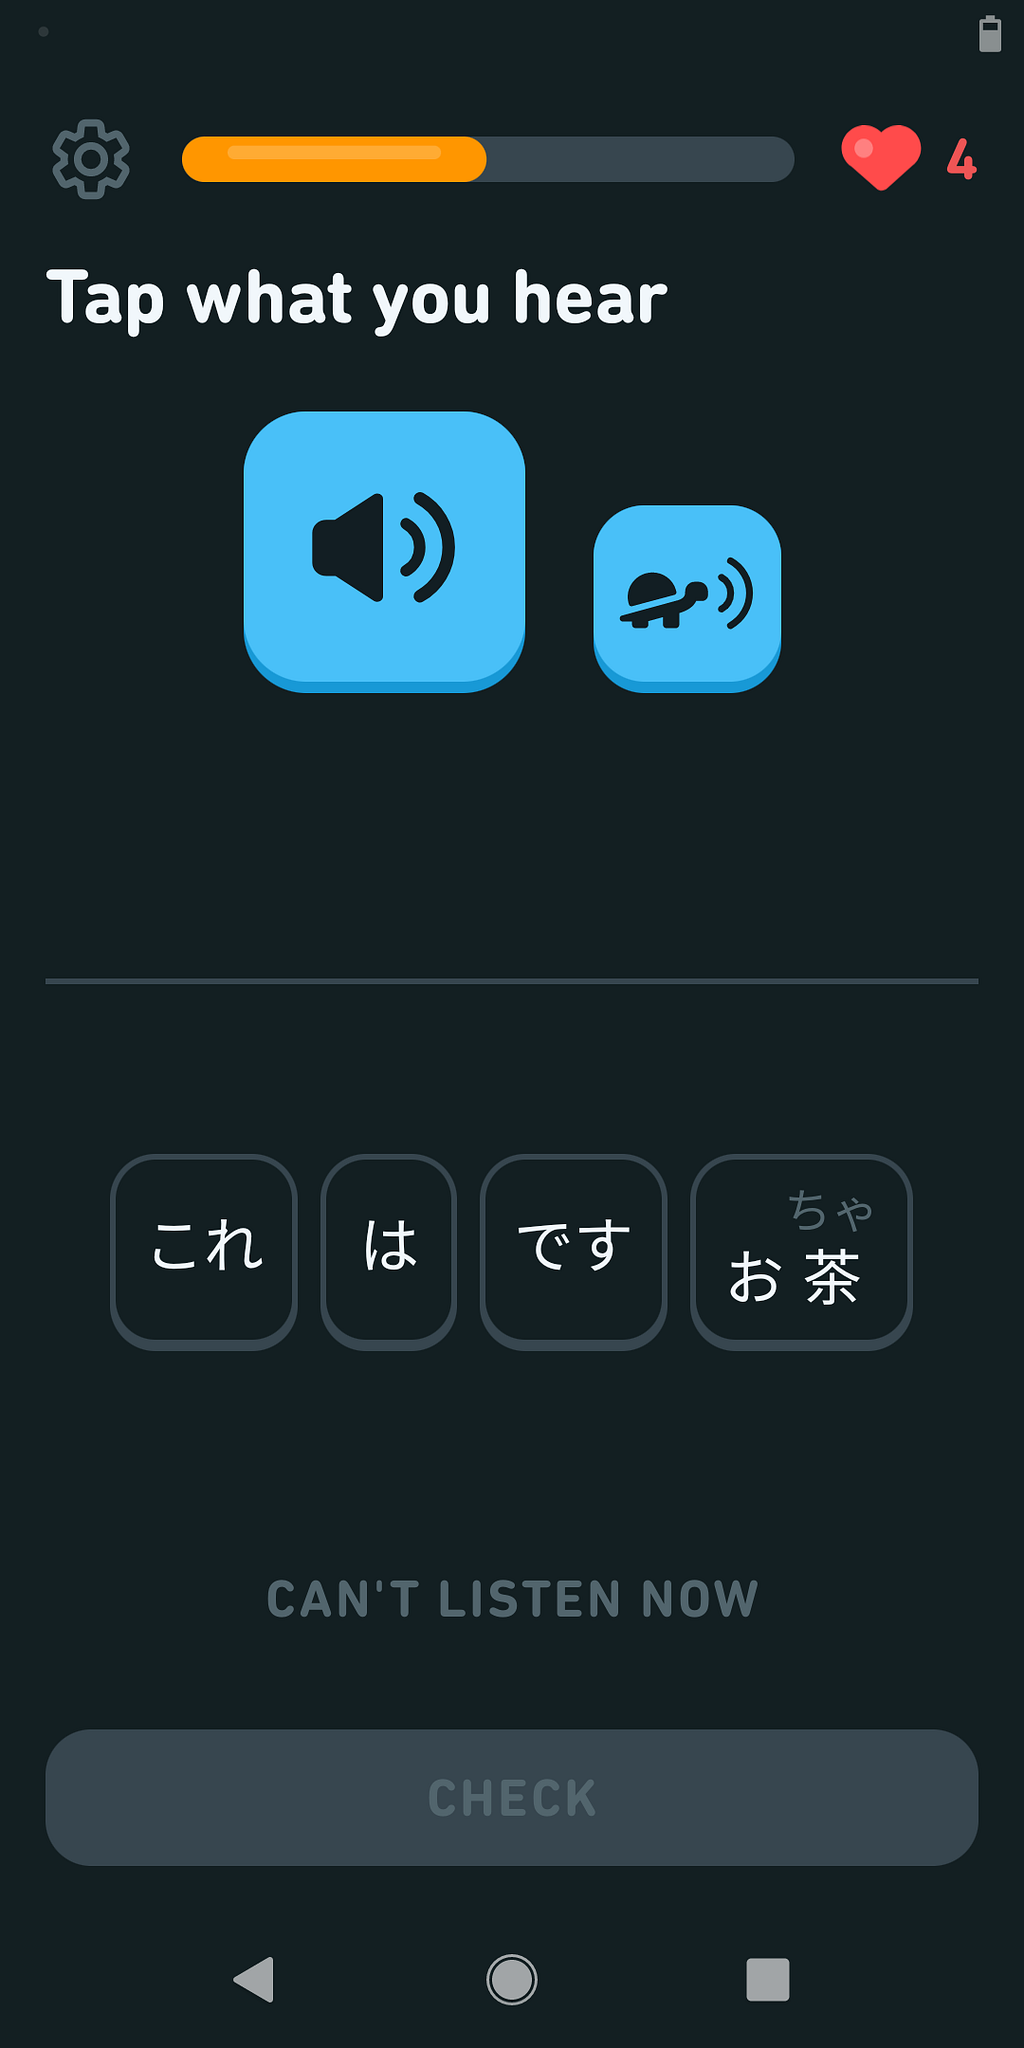 Screenshot of a Duolingo exercise: “Tap what you hear” with a sound button and some Japanese words to choose from